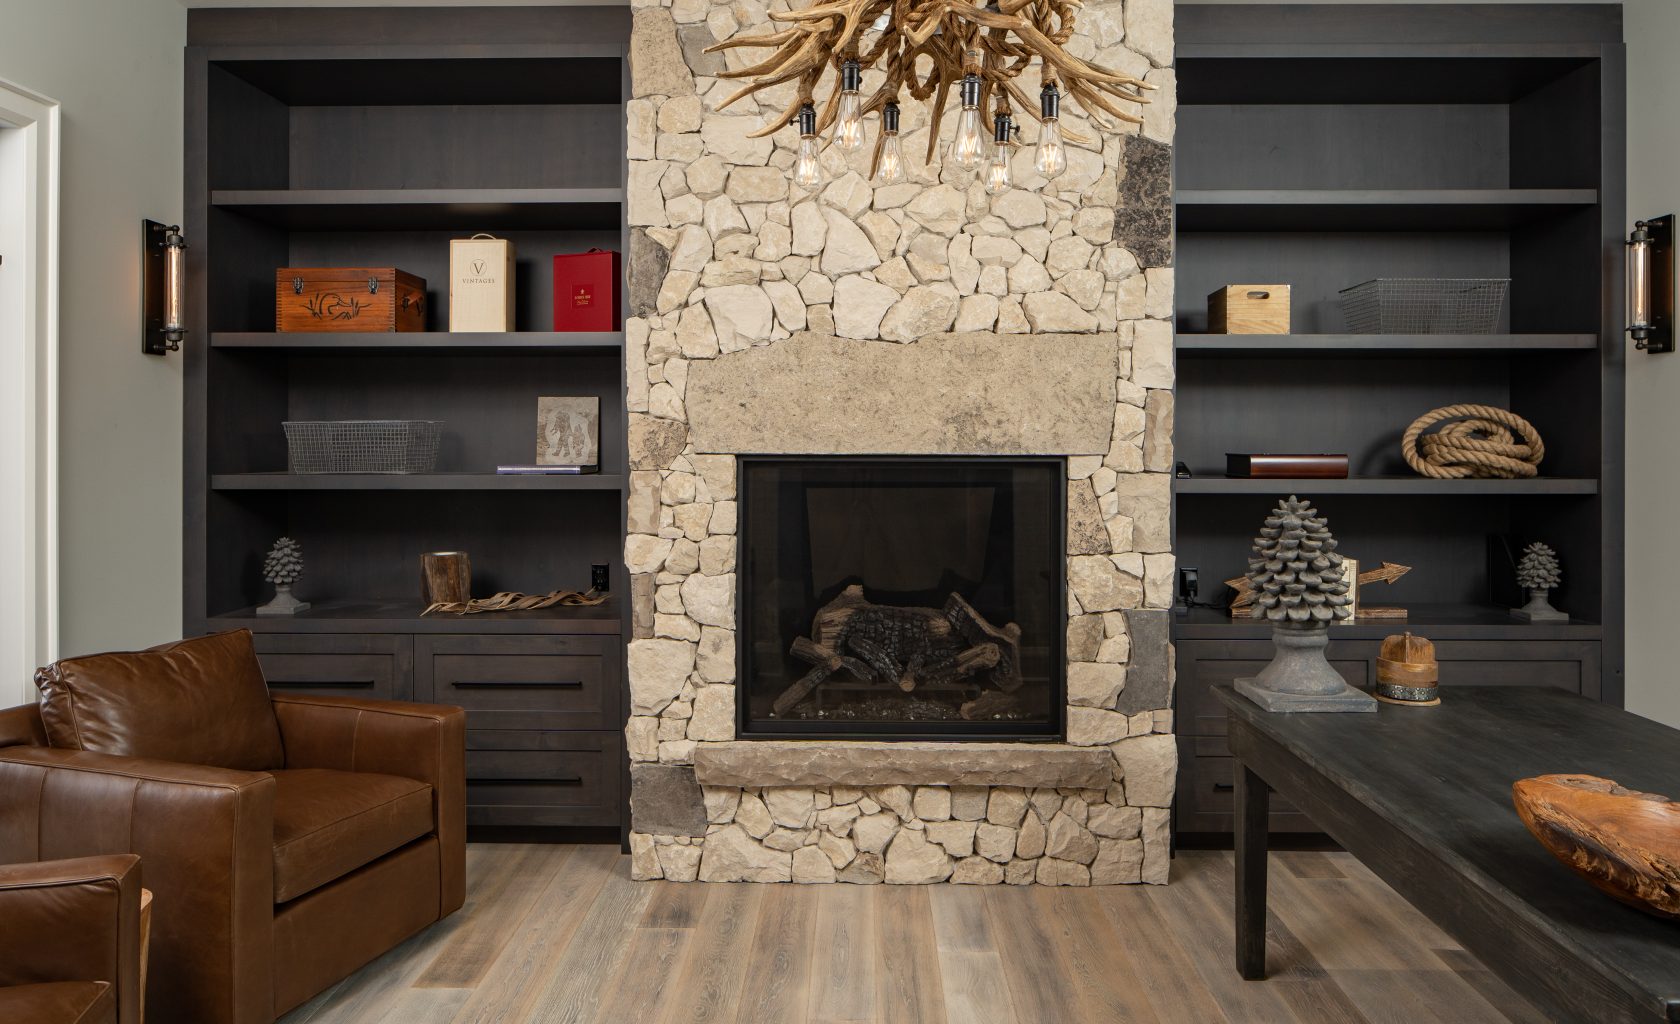 Stunning Built-In shelving with fireplace feature.